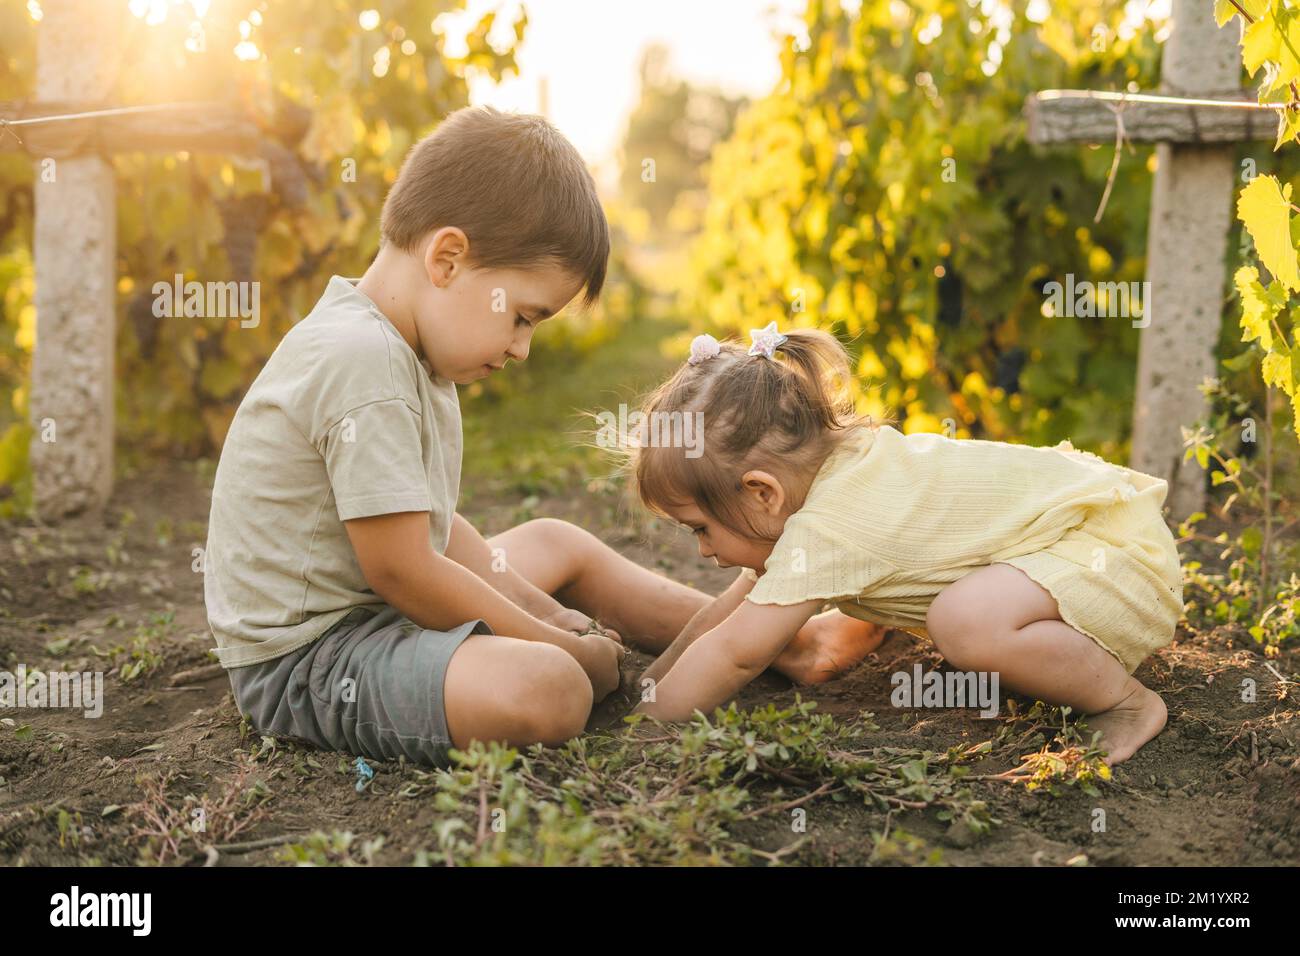 Two kids digging in soil and preparing soil for plant, sitting at sunset in the garden. Summer outdoor fun activity. Summer vacation fun. Agriculture Stock Photo